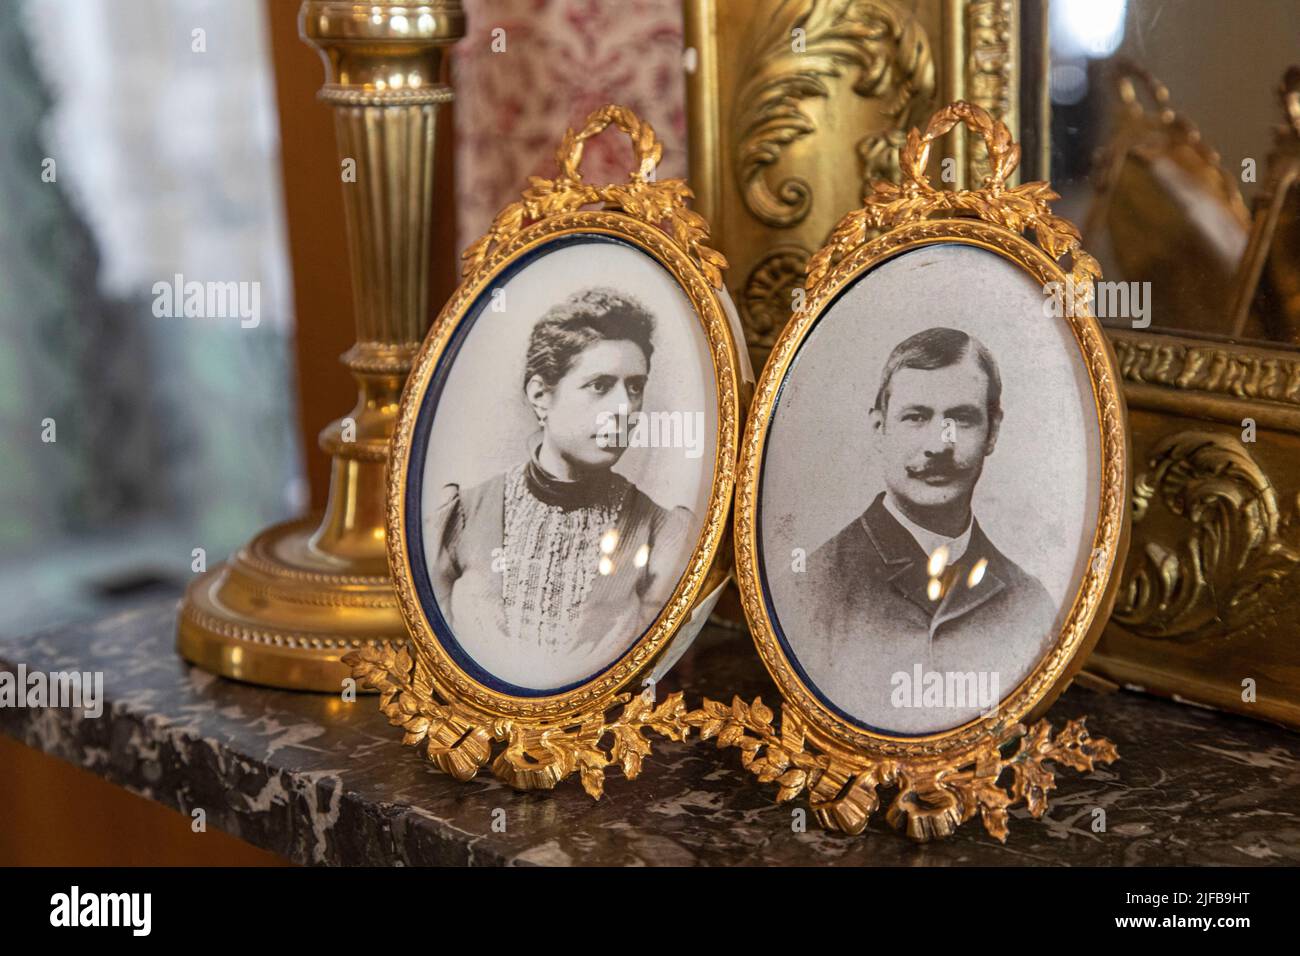 France, Nord, Lille, Charles de Gaulle birthplace, transformed into a museum and located in Old Lille, photographs of Charles De Gaulle's parents Stock Photo